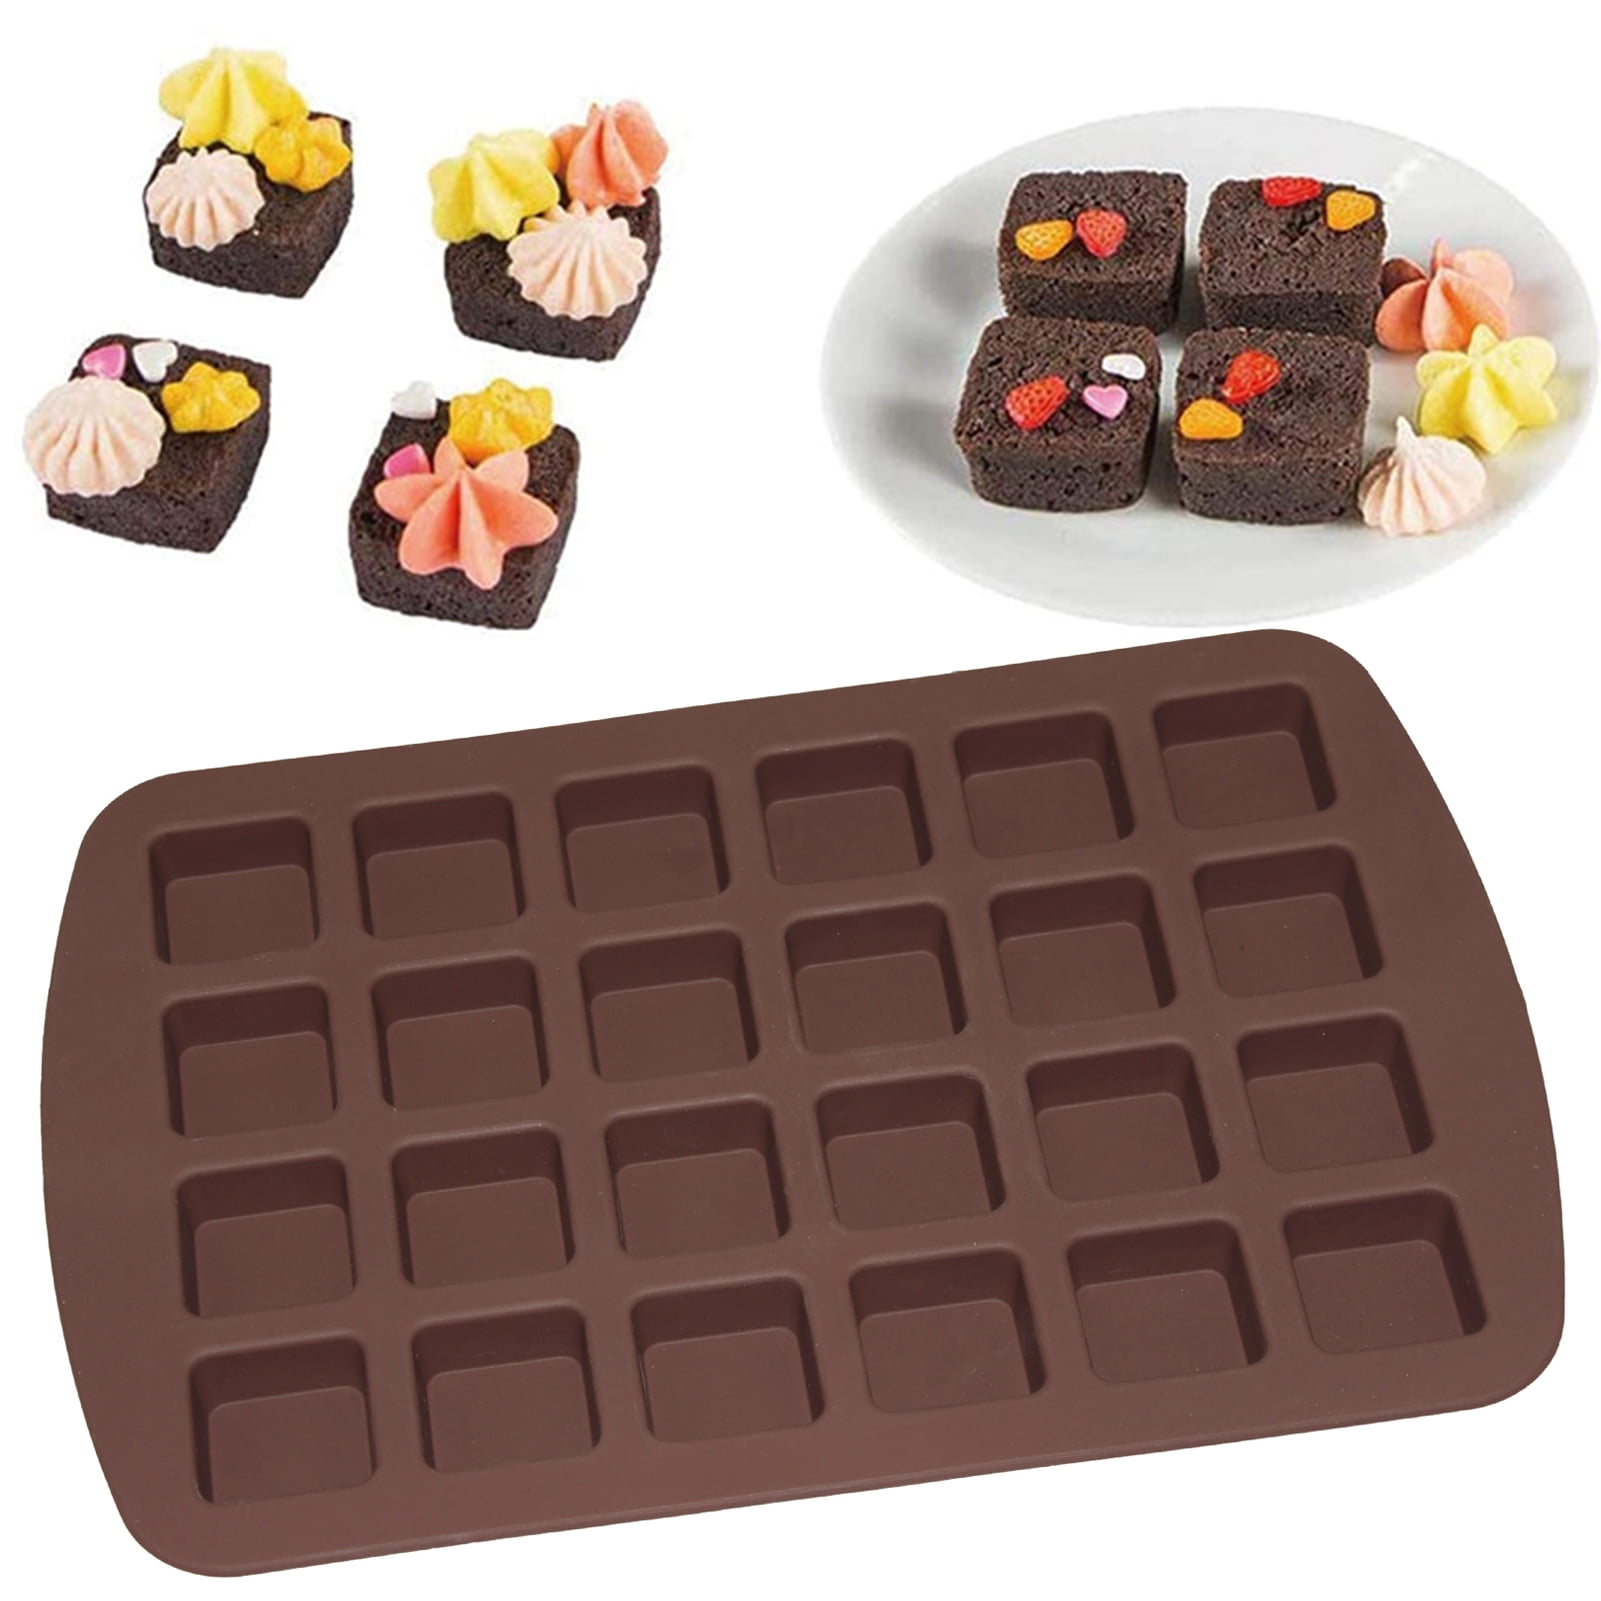 Mveomtd Doll Silicone Creative Chocolate Shaped Fudge 3pcs KitchenDining & Bar Valentines Molds for Chocolate Small Foil Pans Mini Stainless Steel Pie Pans